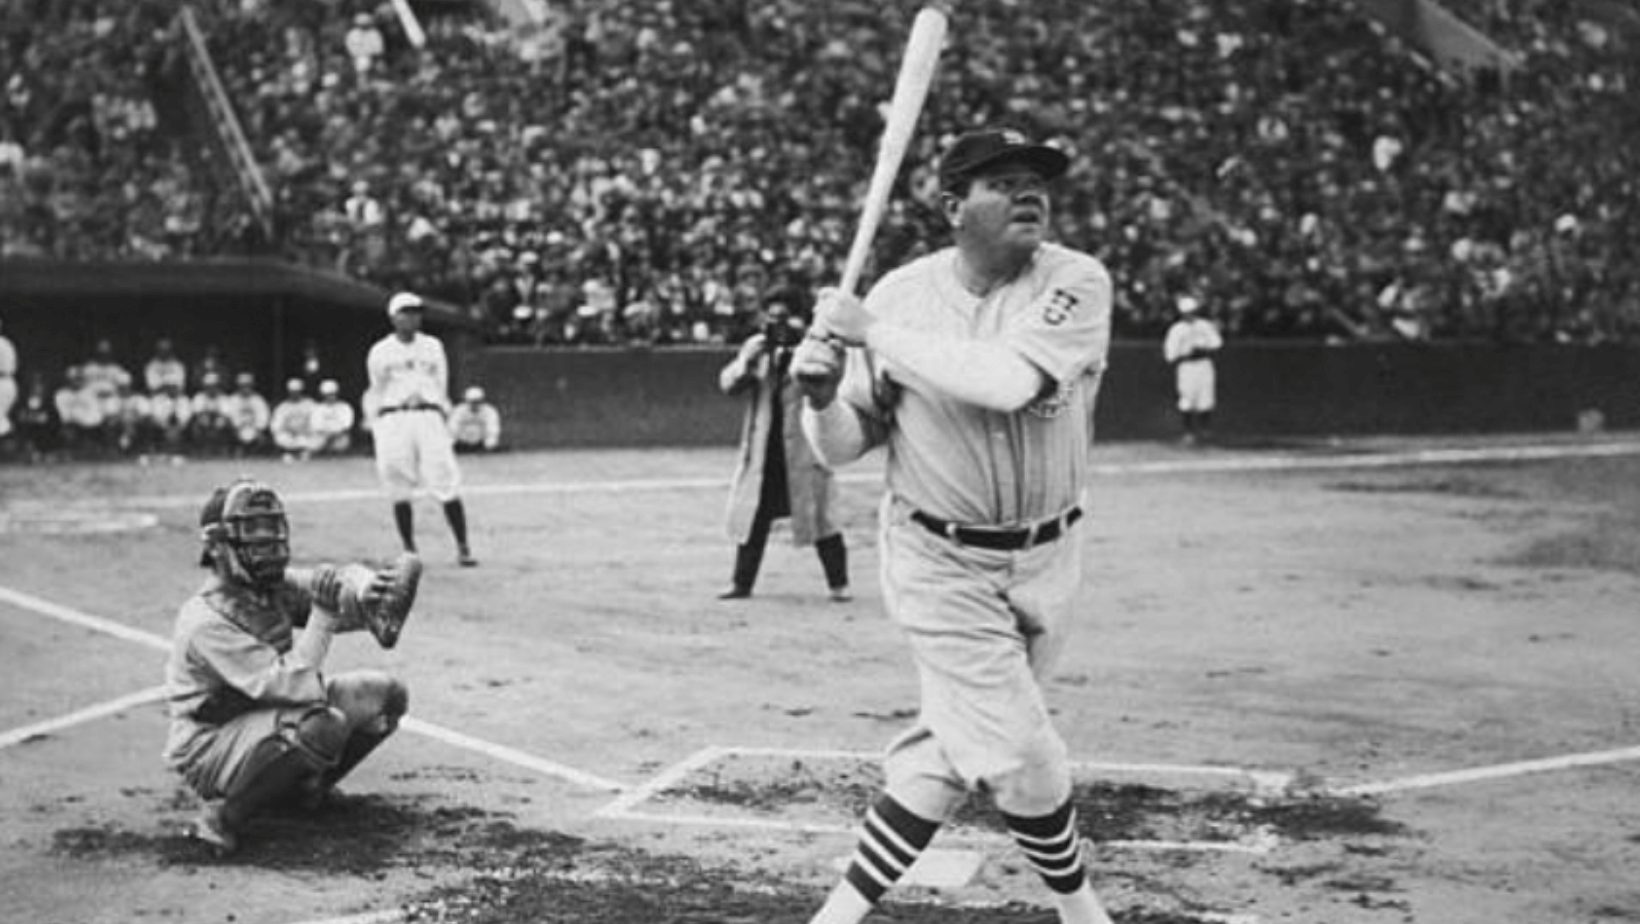 MLB pitcher has curious take on Babe Ruth if he played today